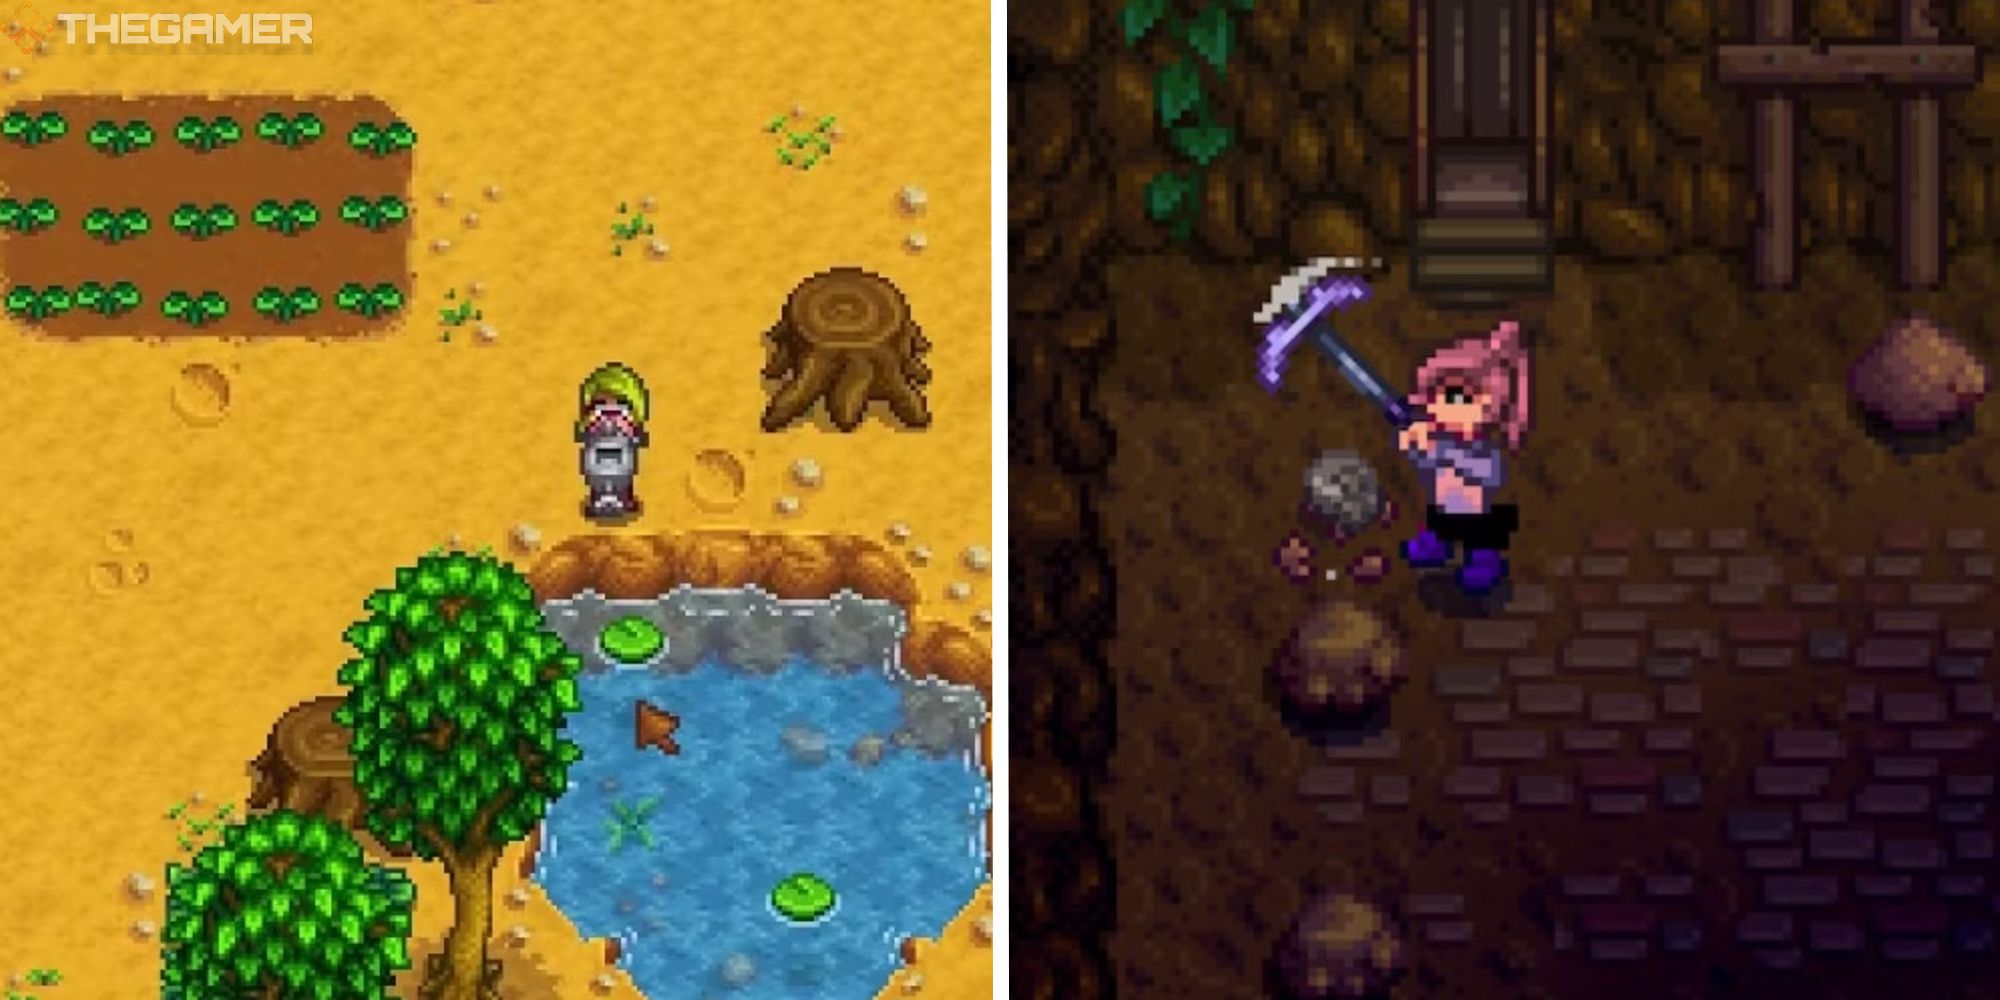 split image showing player using a watering can next to an image of a player using a pickaxe